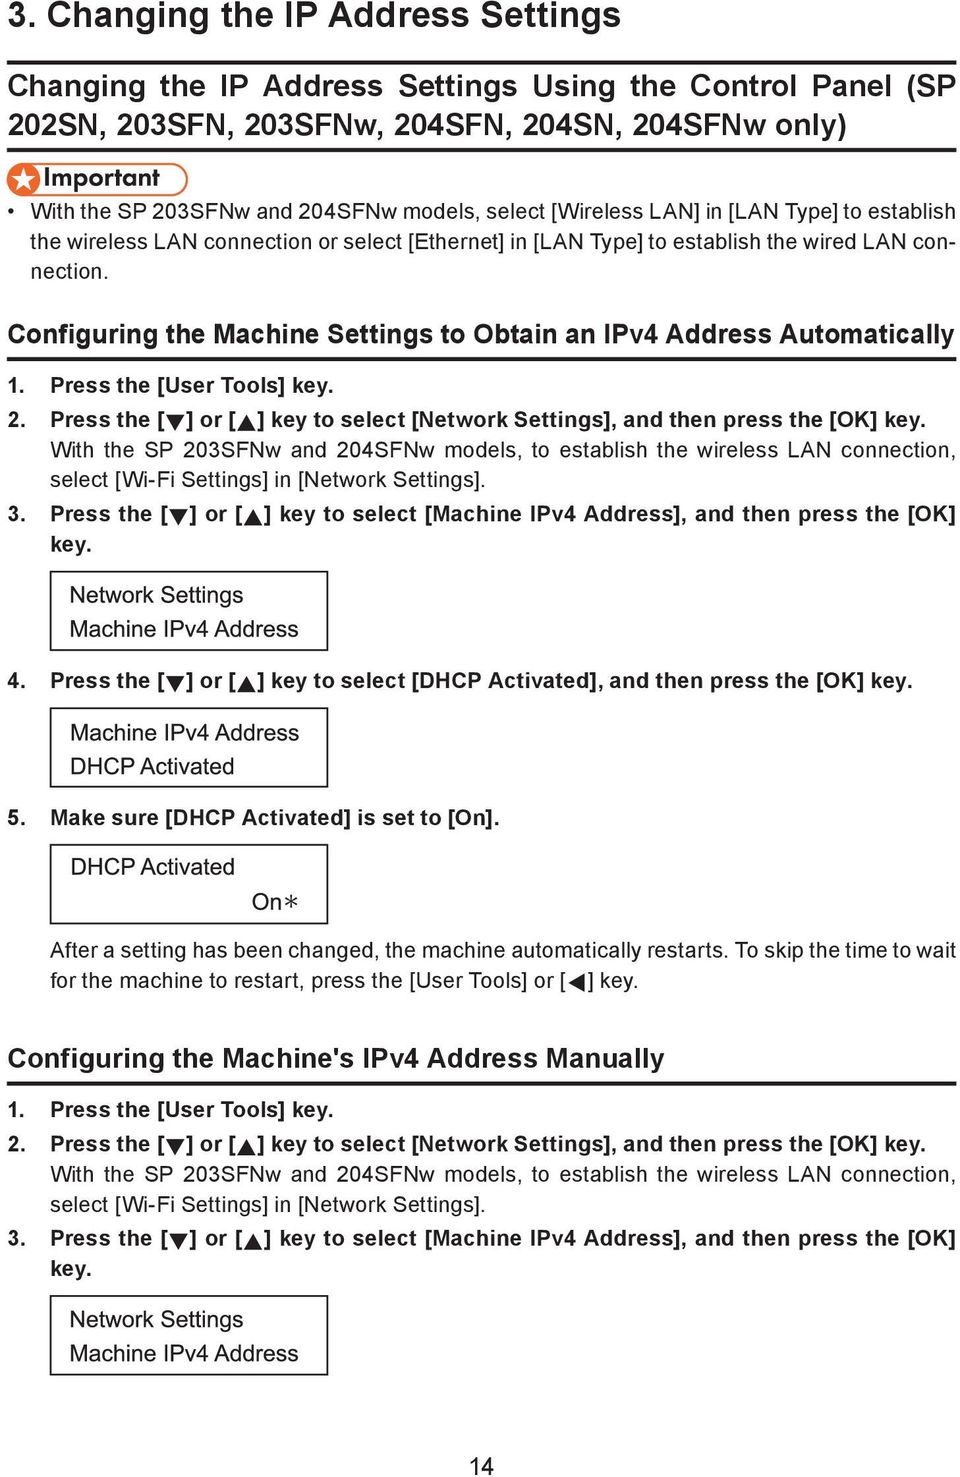 Configuring the Machine Settings to Obtain an IPv4 Address Automatically 1. Press the [User Tools] key. 2. Press the [ ] or [ ] key to select [Network Settings], and then press the [OK] key.